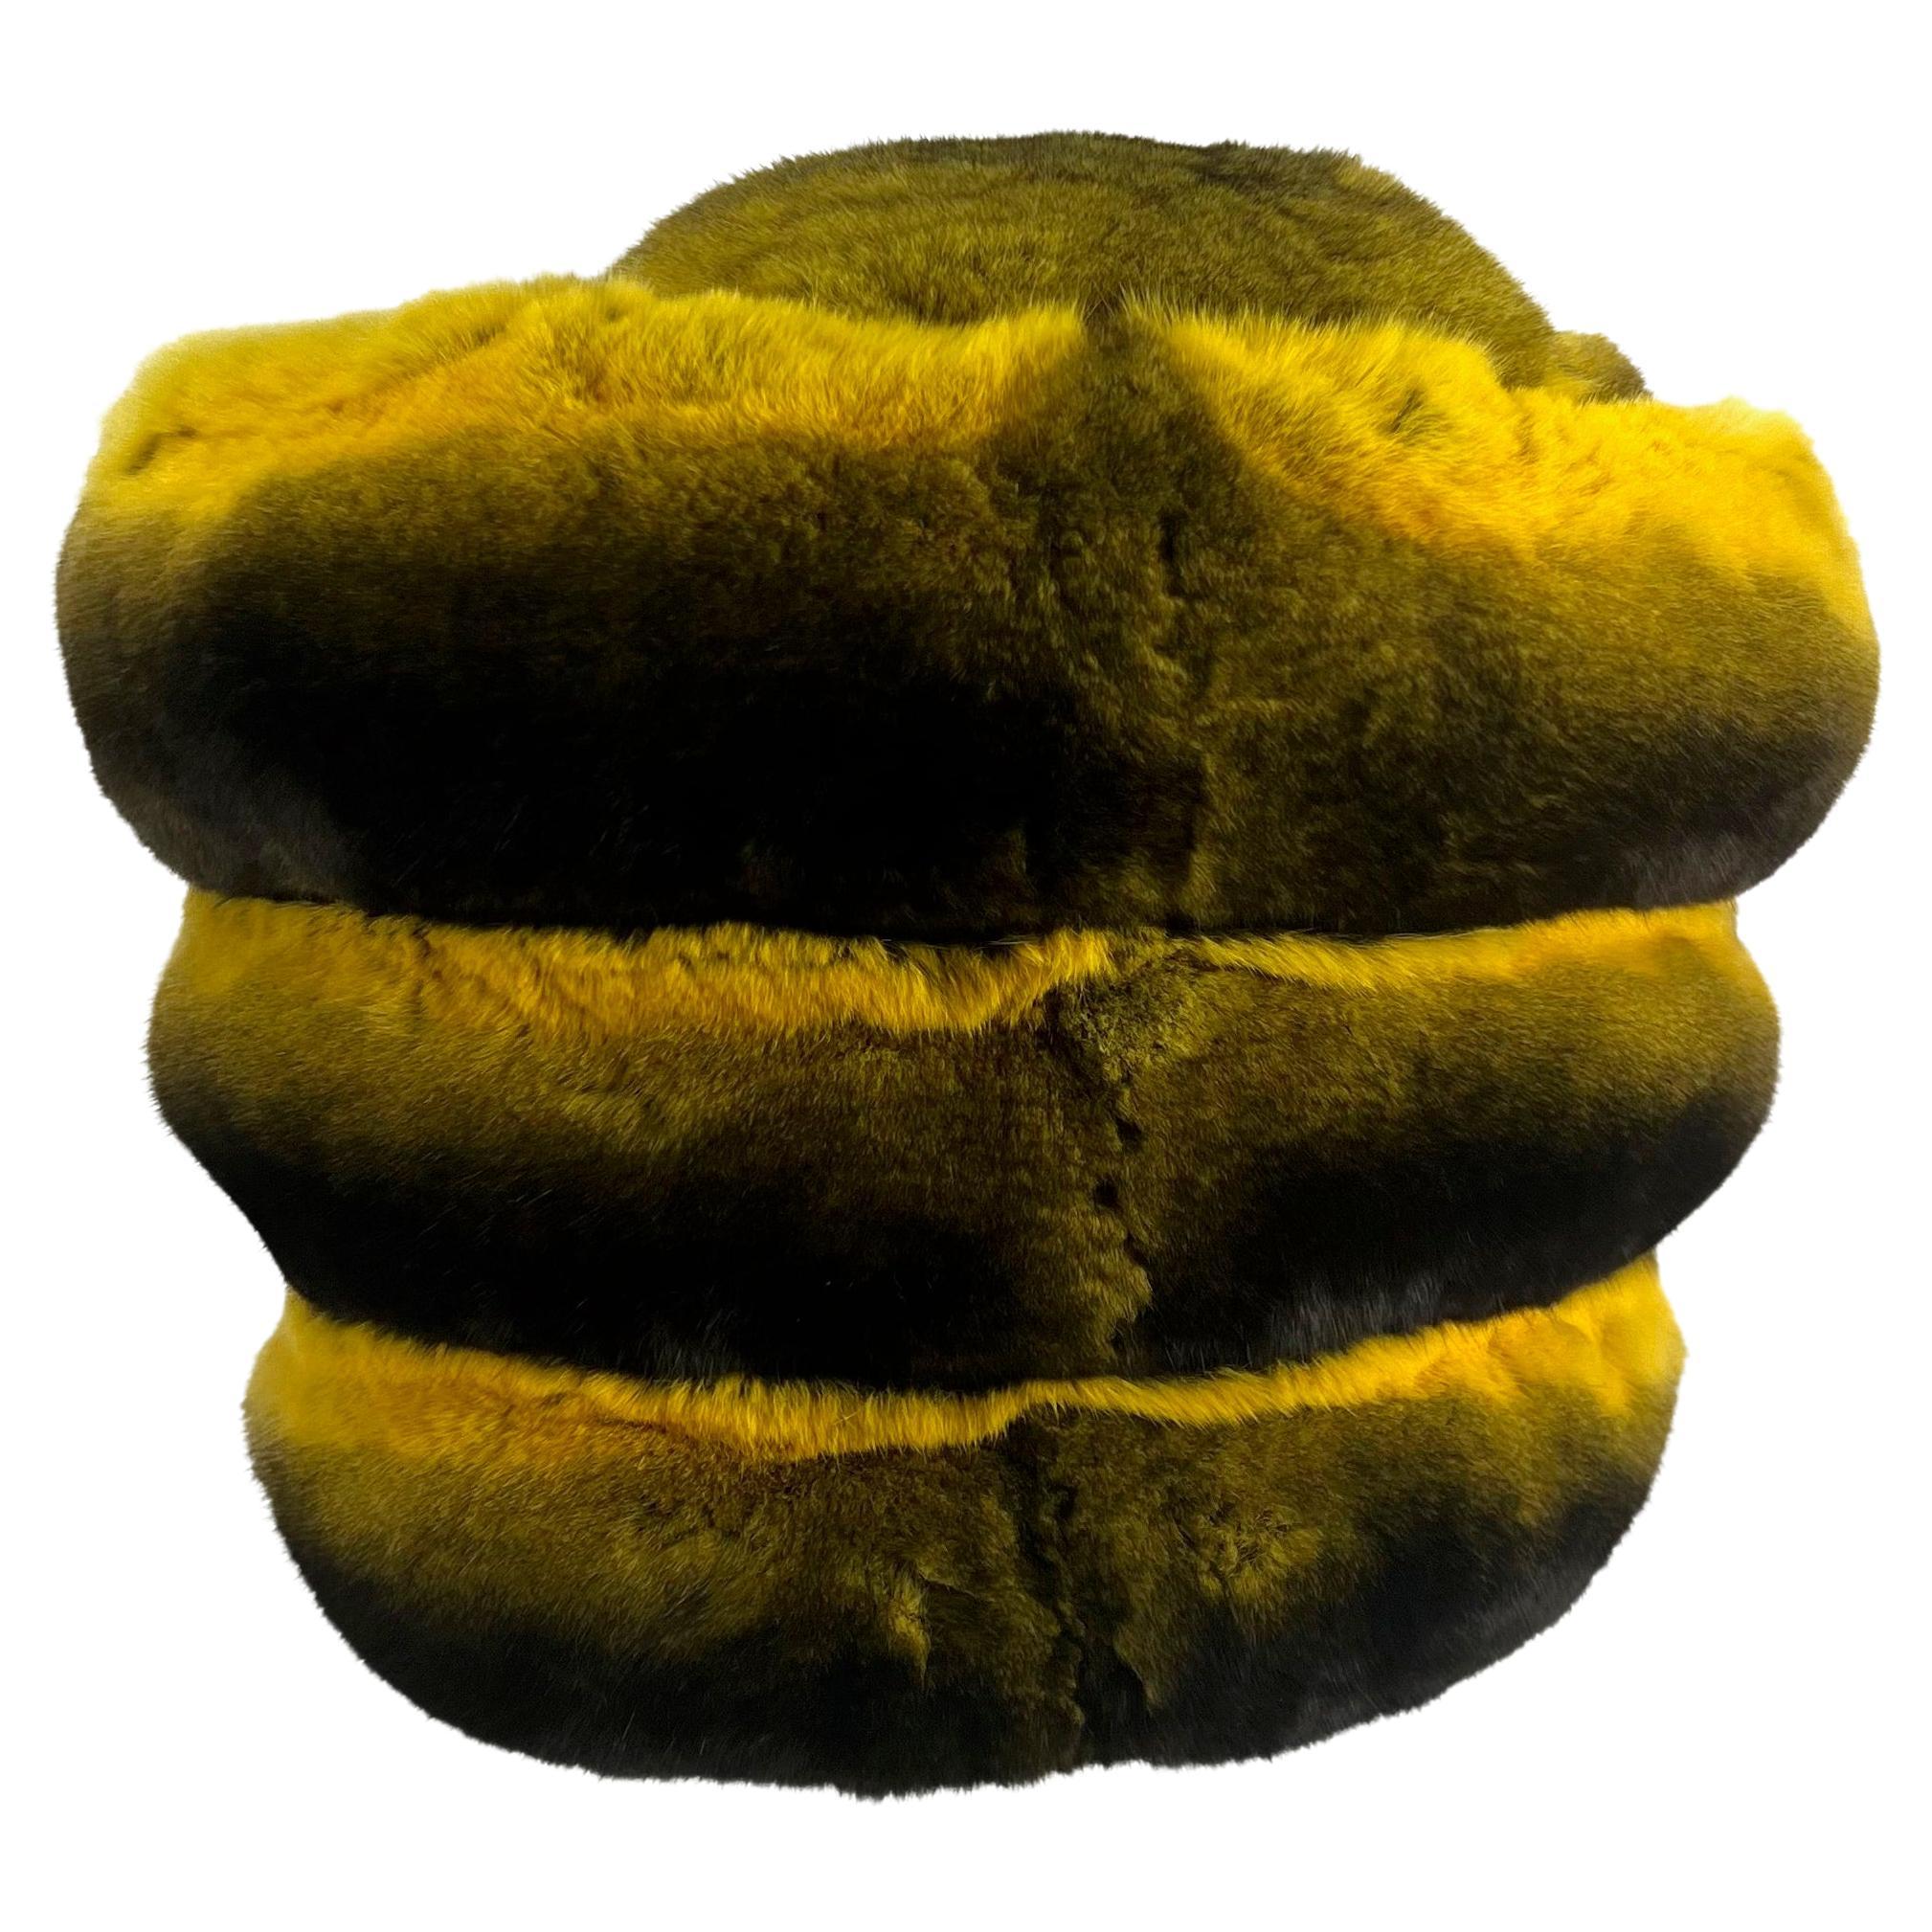 Suzanne Couture Millinery Oversized Yellow and Black Chinchilla Fur Beehive Hat  In Good Condition For Sale In West Hollywood, CA